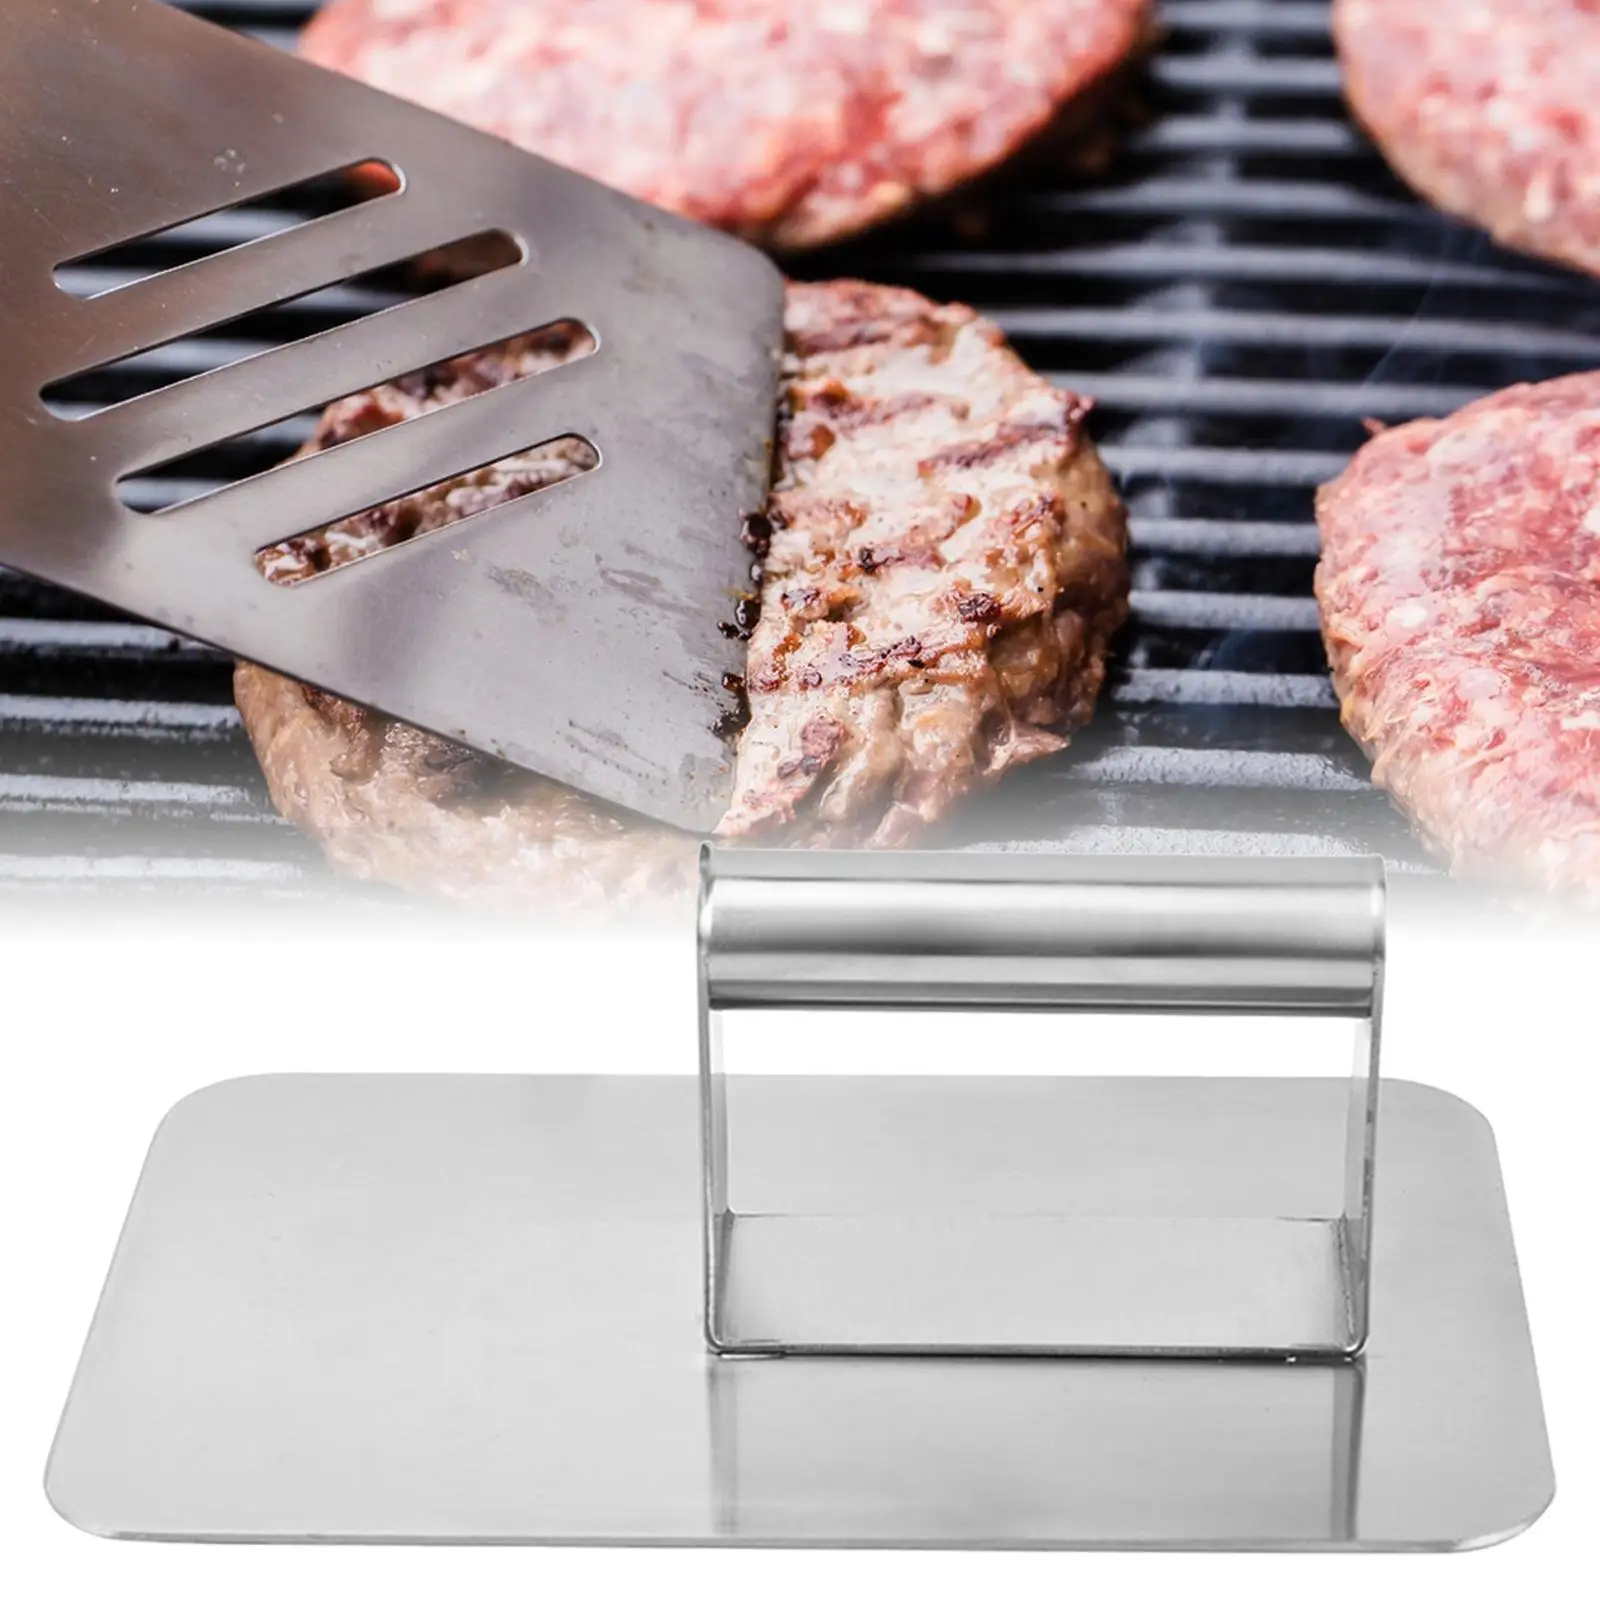 Stainless Steel Burger Press Rectangle Nonstick Flat Bottom Steak Press Grill Press for Steak Making Cooking Grilling Tool Grill